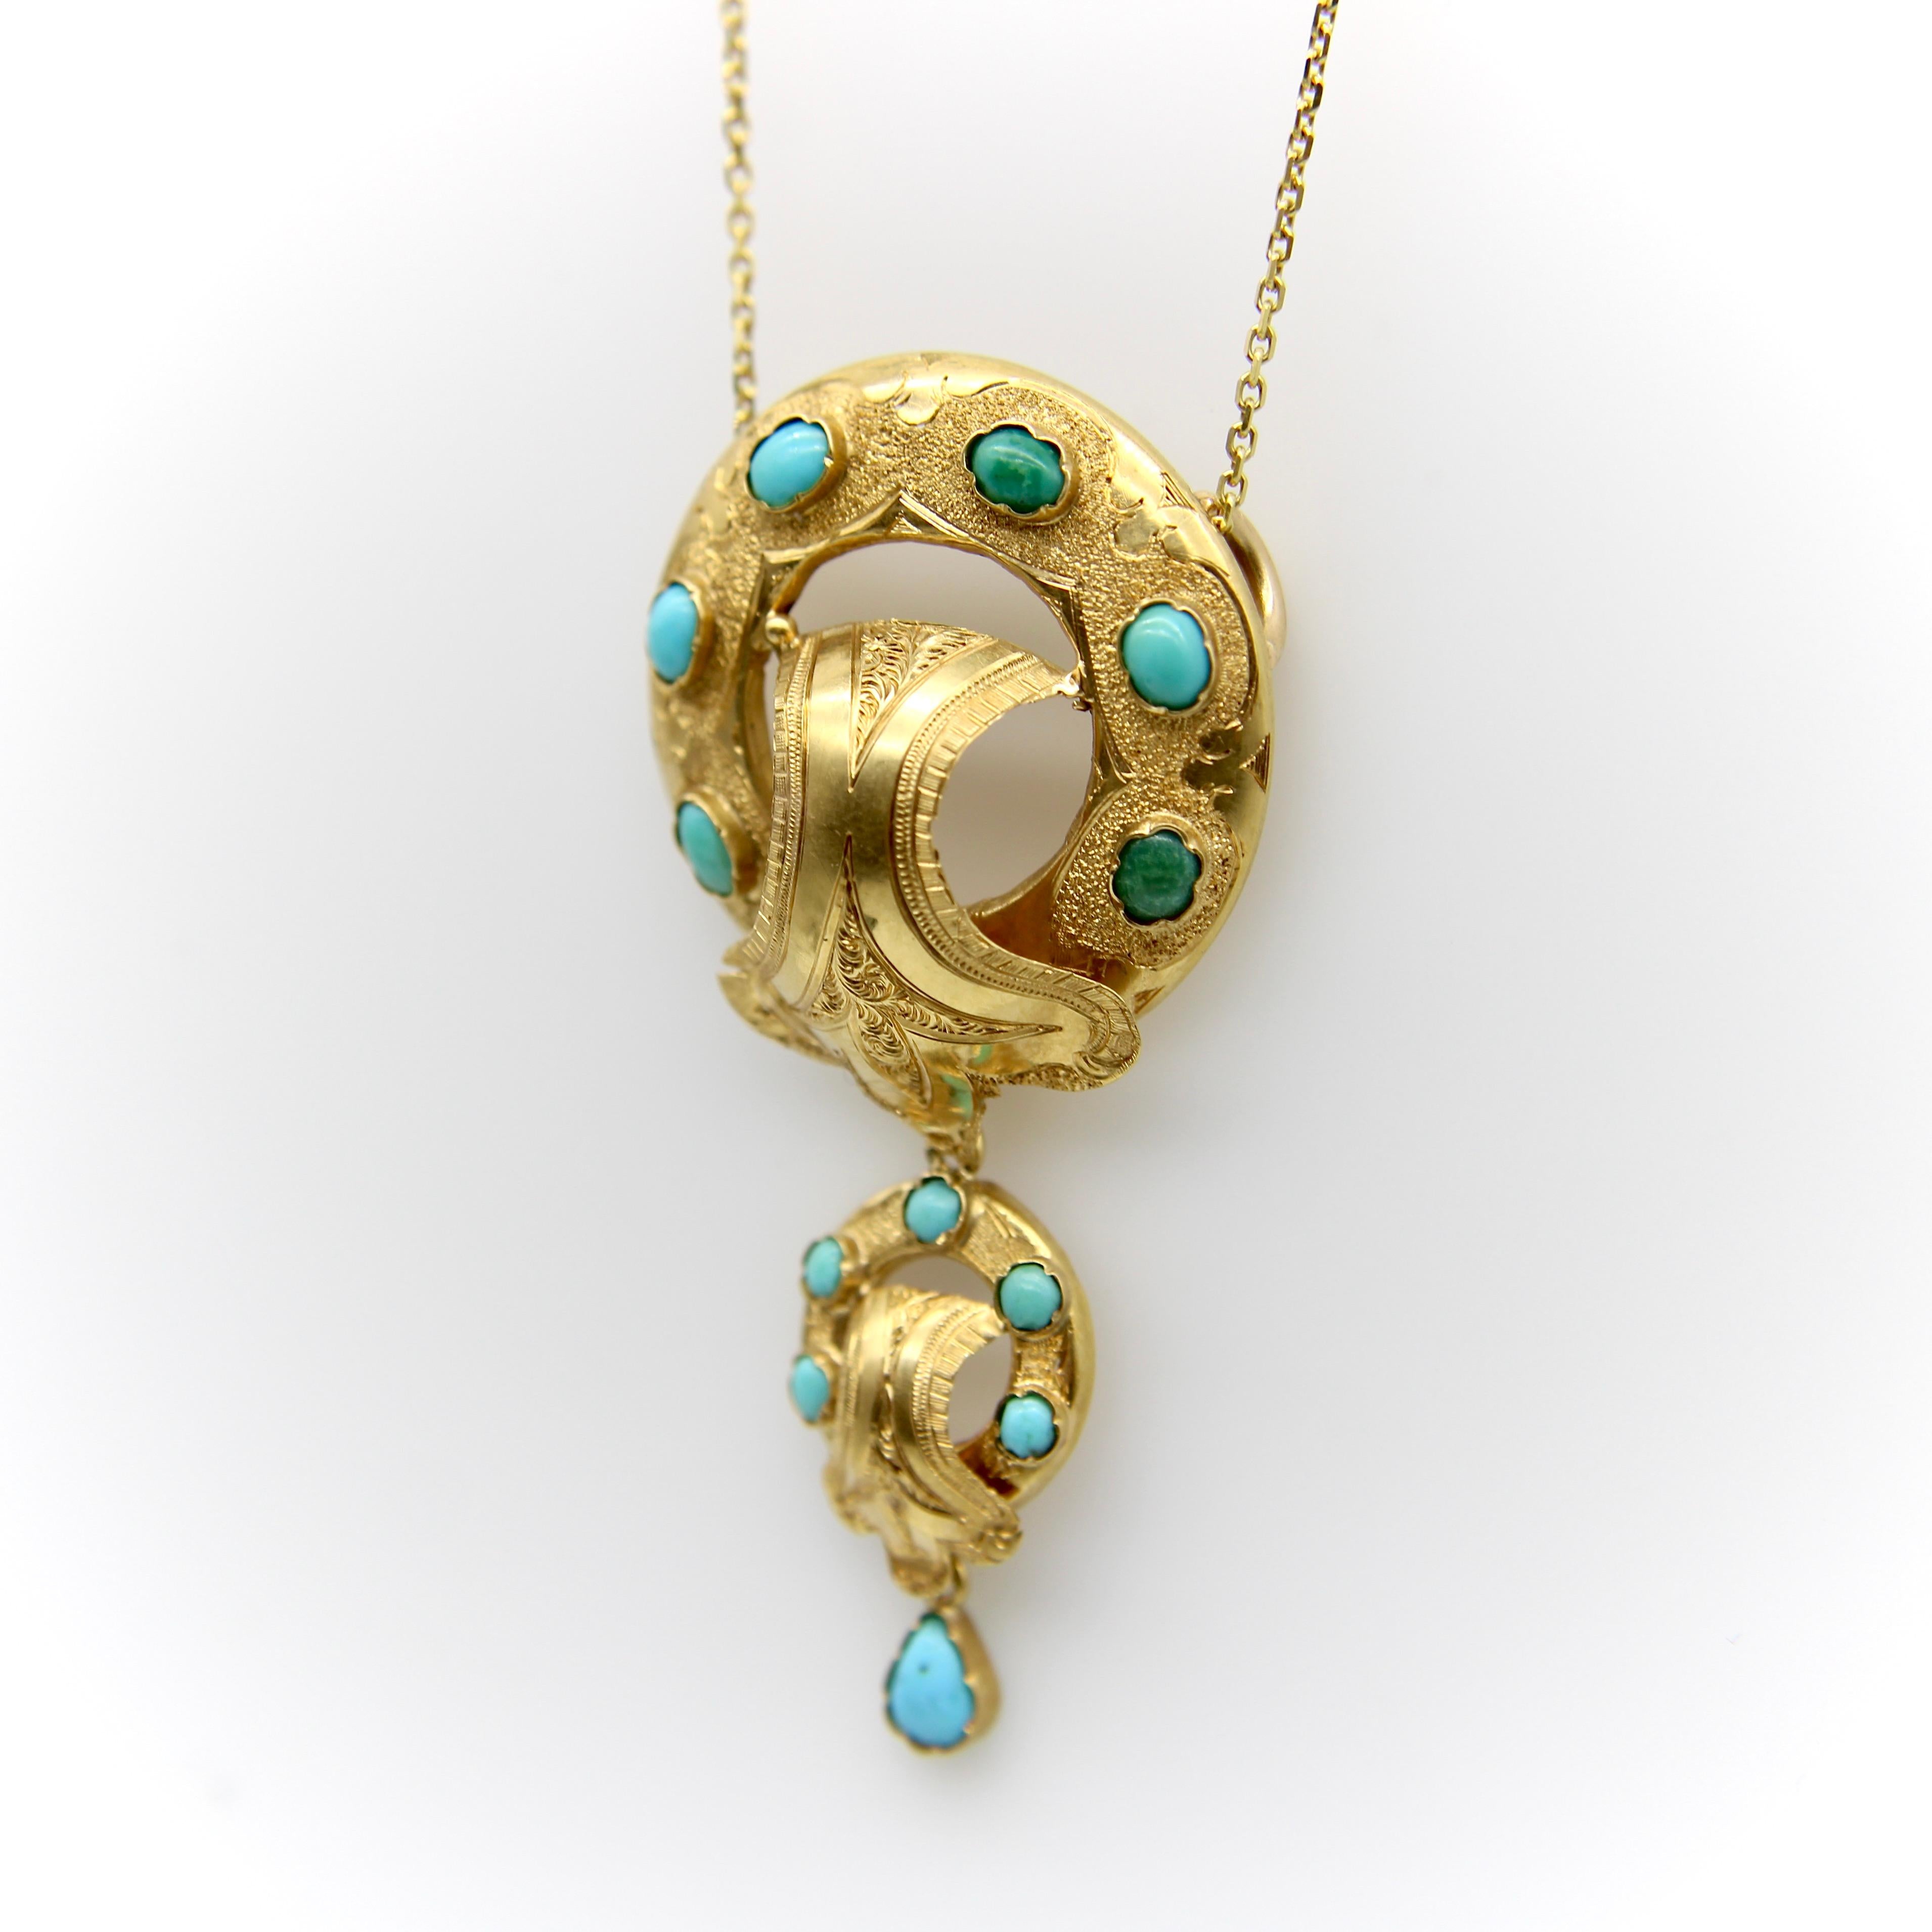 This is a fantastic 14 karat gold and turquoise Etruscan Revival pendant necklace from the Victorian era. It features detailed hand engraved gold and fabulous turquoise cabochons with movement from dangling elements.

Etruscan Revival jewelry has a